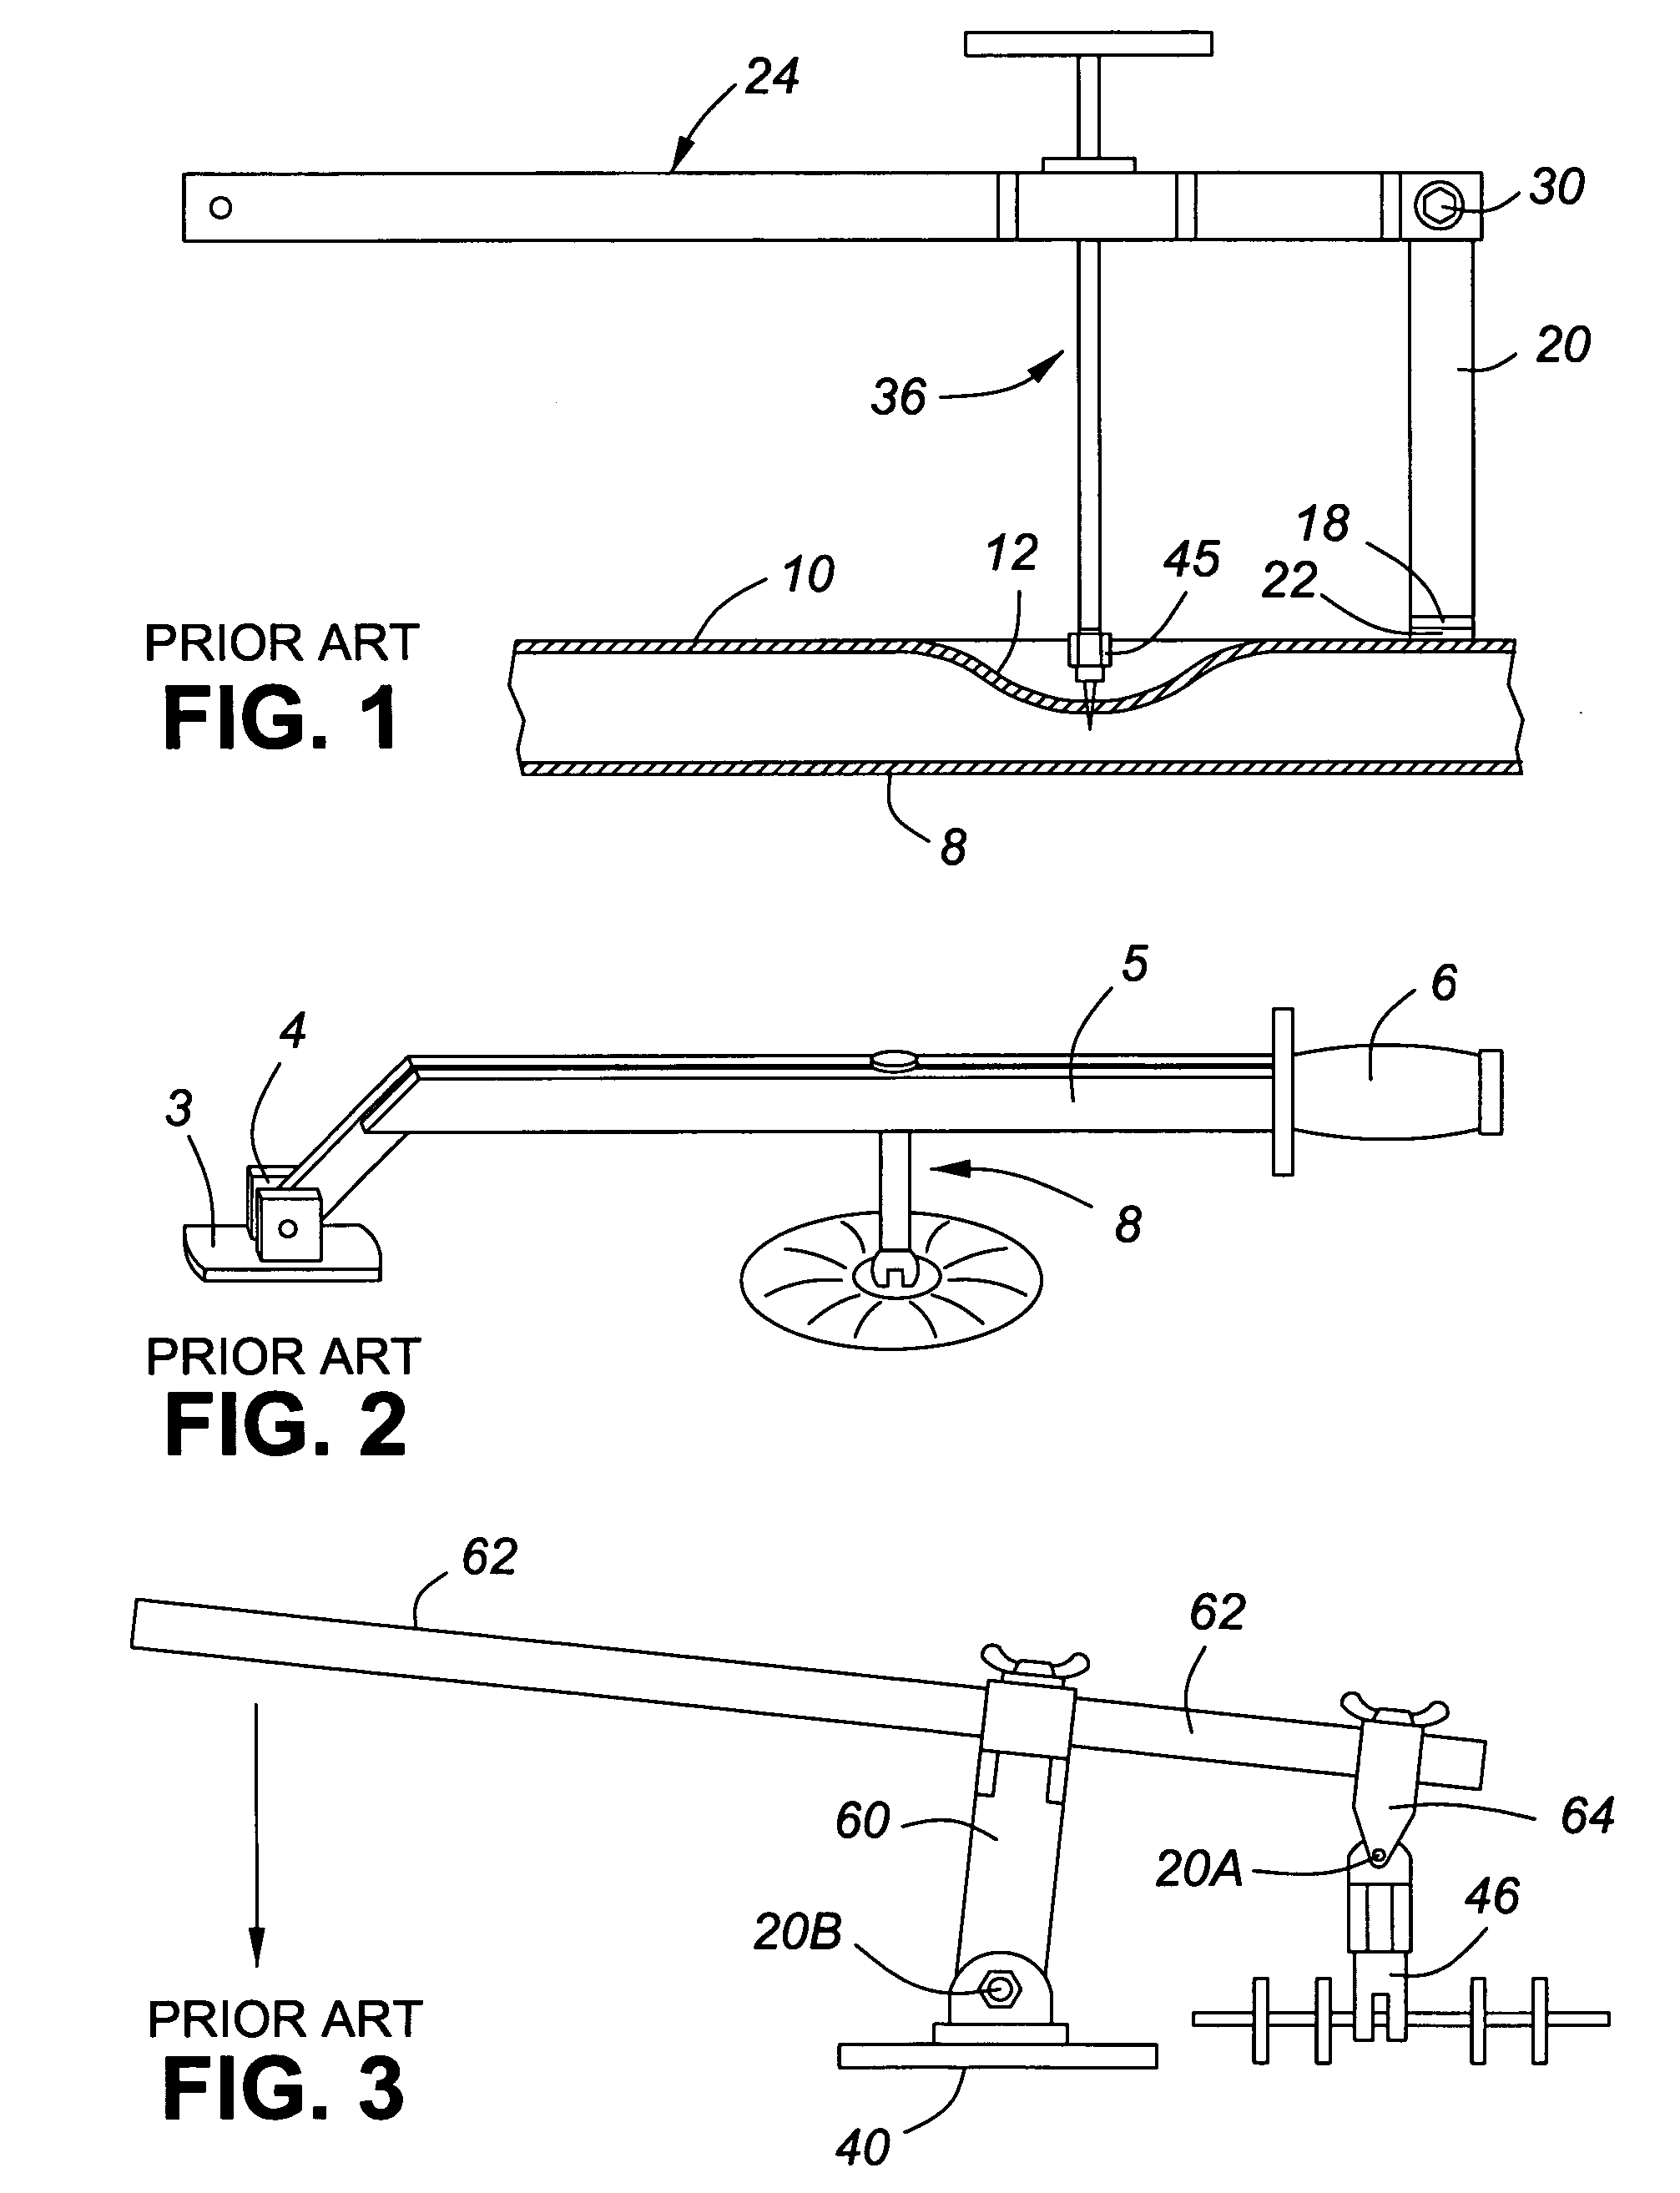 Tool for removing dents from sheet metal